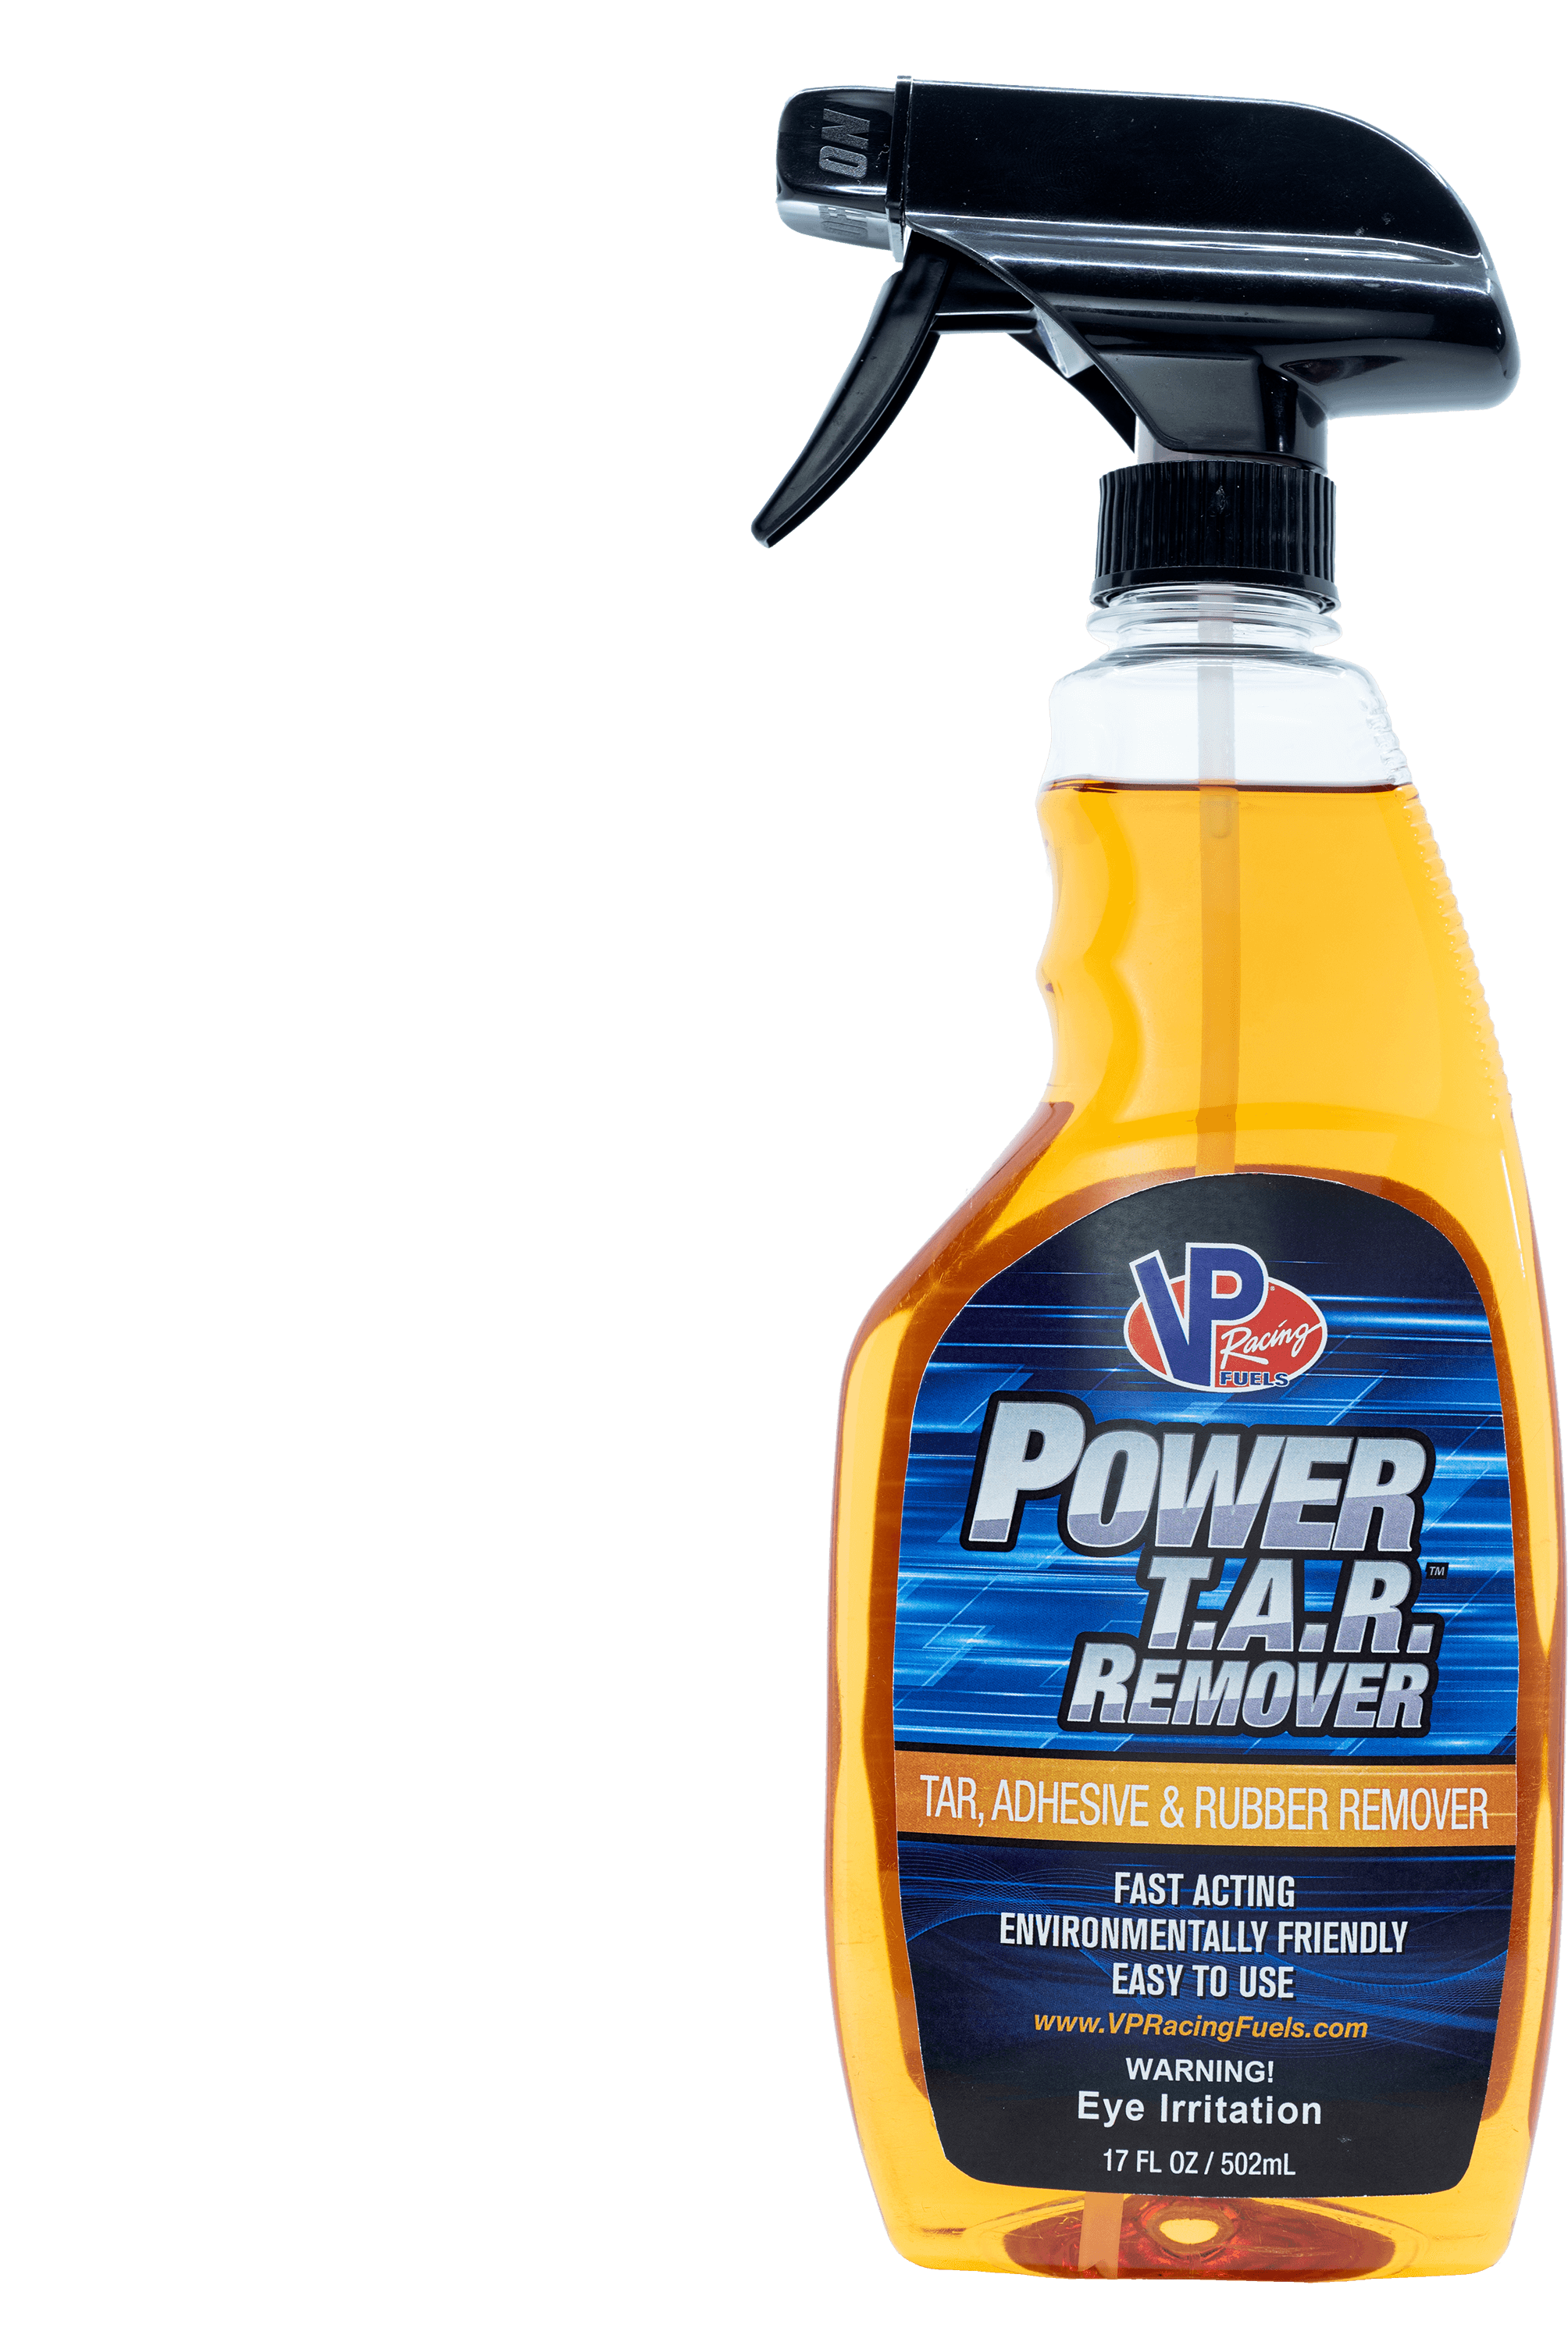 Paint remover /stripper on fibre or plastic bodies